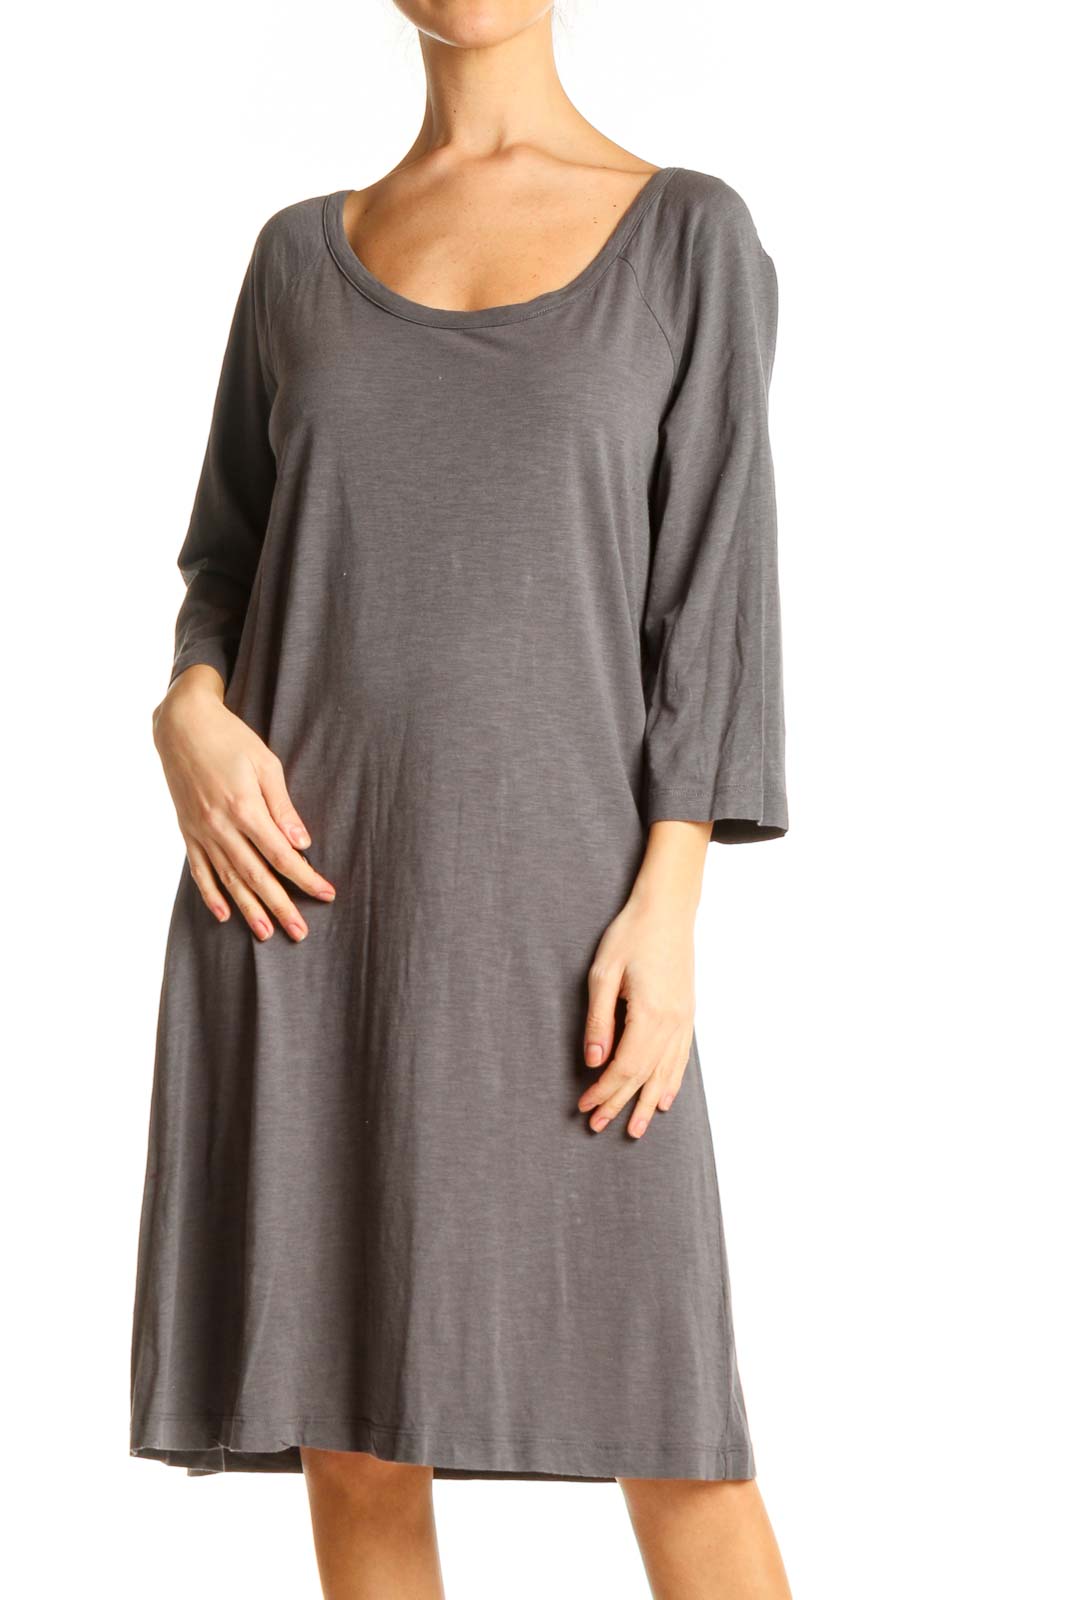 Gray Solid Day Dress Front